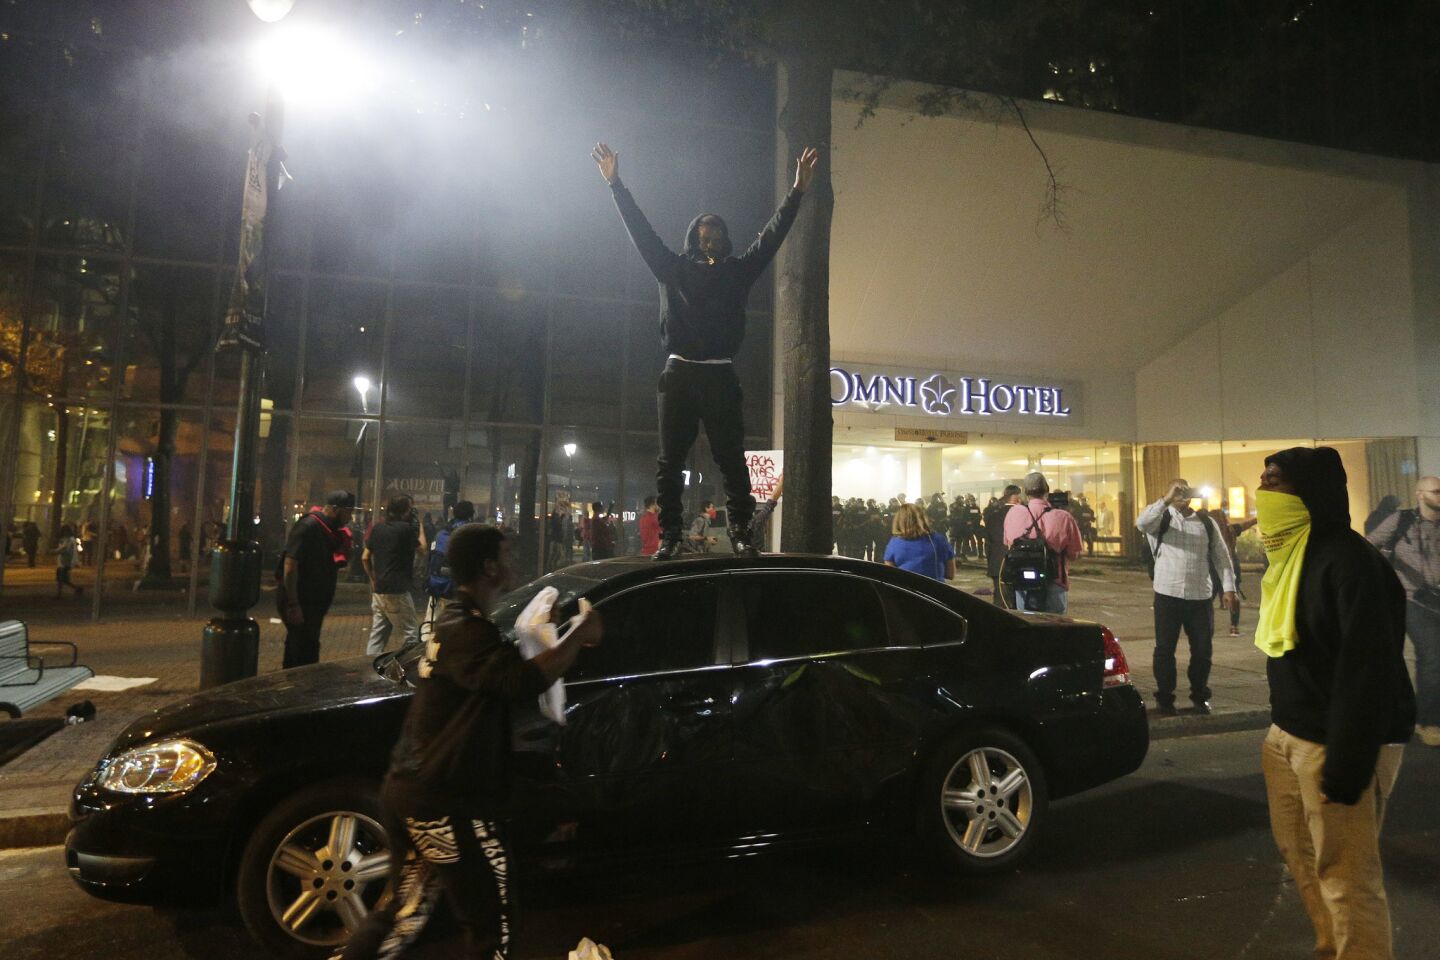 Protests break out in North Carolina after police fatally shoot black man